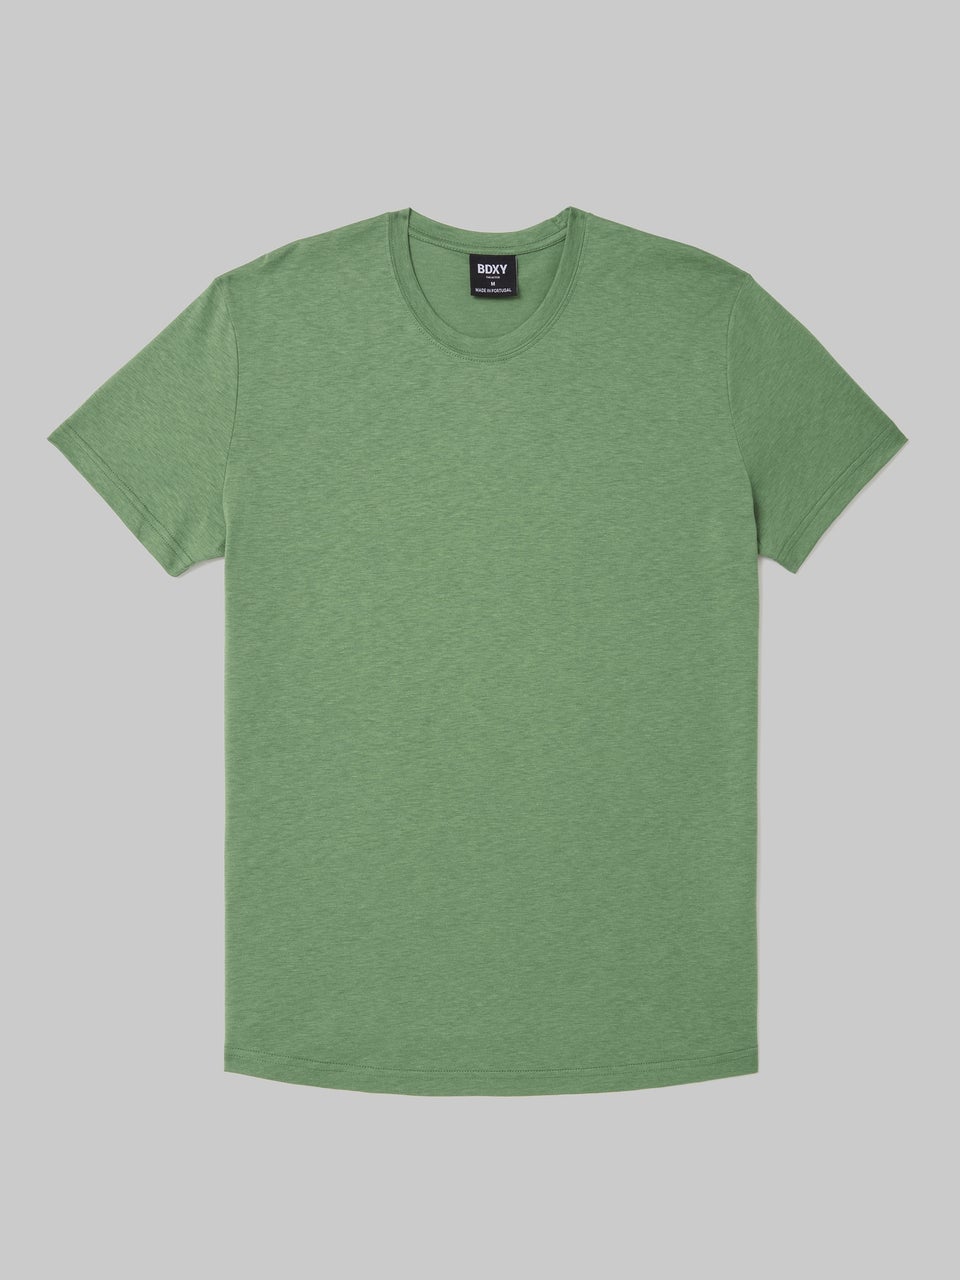 'The Actor' T-shirt - Green